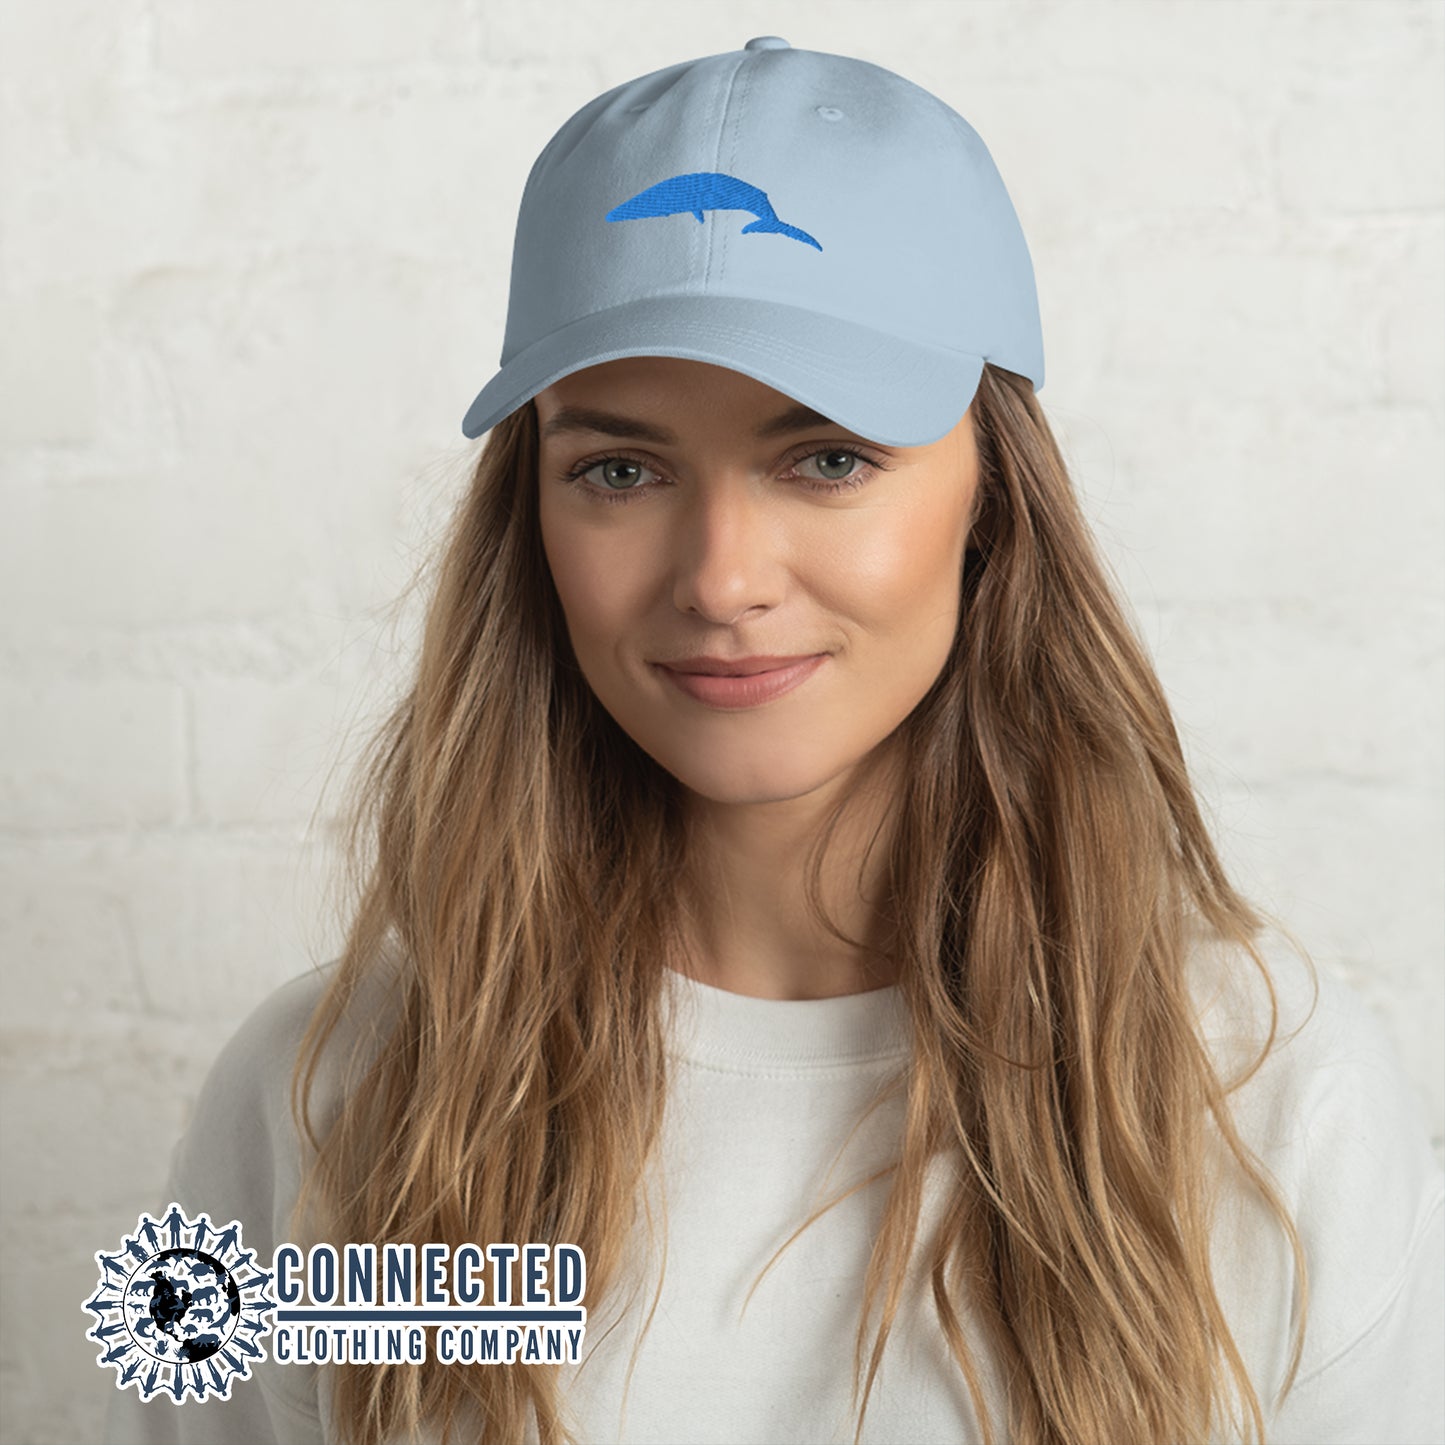 Model Wearing Blue Blue Whale Cotton Cap - sweetsherriloudesigns - 10% of profits donated to Mission Blue ocean conservation